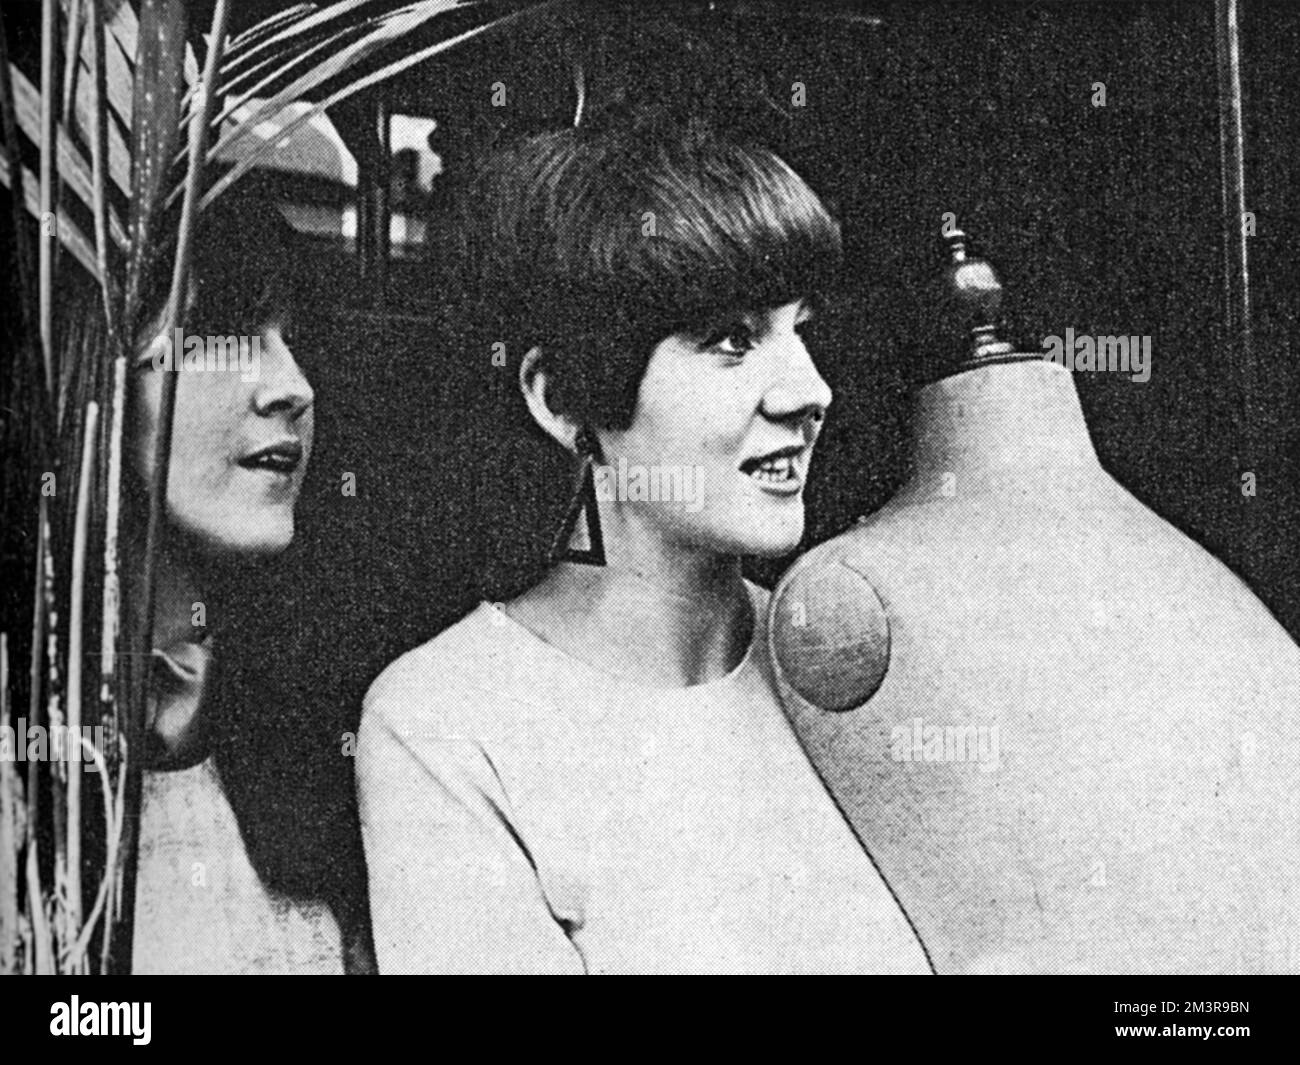 Ready, Steady Go presenter and style leader Cathy McGowan, together with singer Cilla Black help the cult fashion store Biba to move premises from Abingdon Road to Church Street in Kensington in 1966.  The move was orchestrated as a publicity stunt with around sixty models and well-known personalities being involved.       Date: 1966 Stock Photo